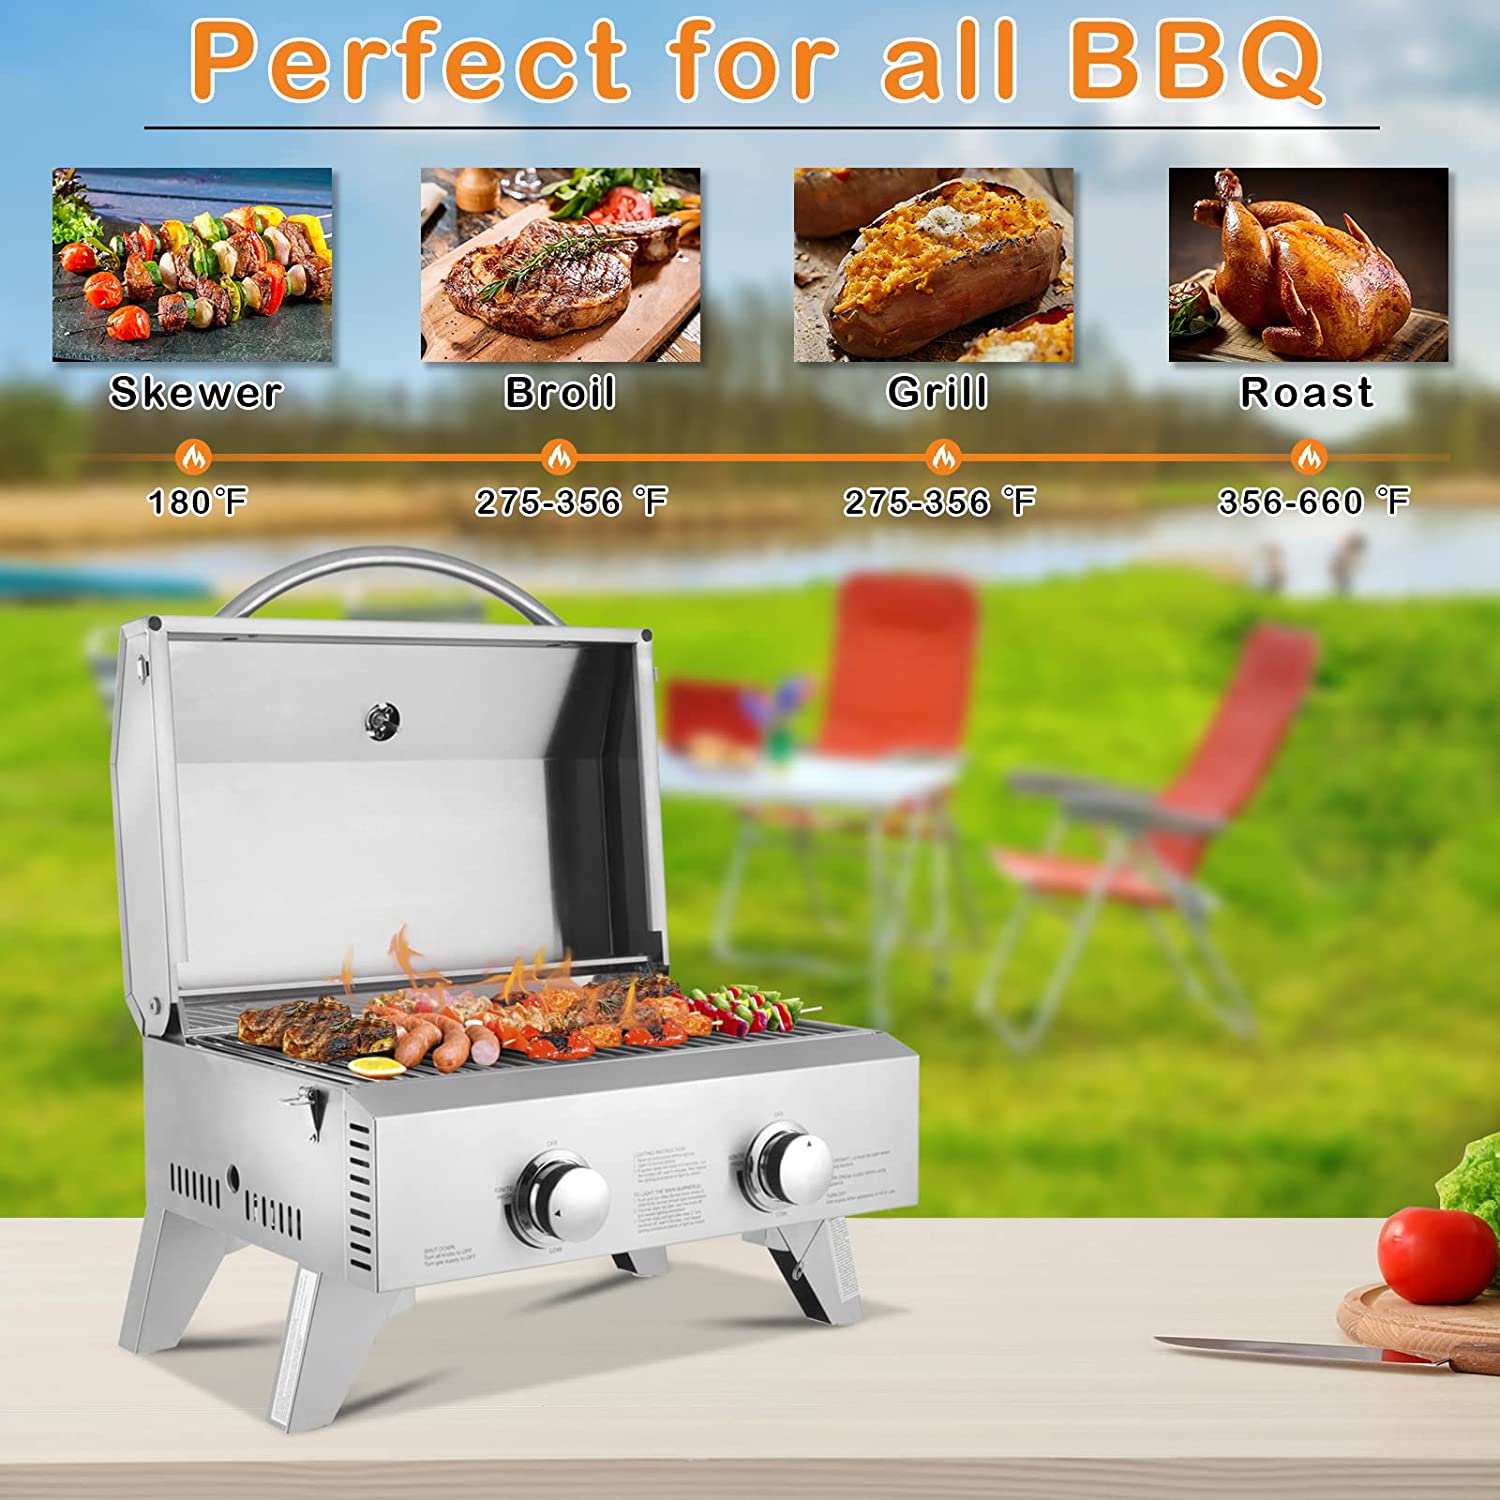 ROVSUN Extra Large 20,000 BTU Portable Gas Grill, 2 Burner Tabletop Propane Griddle with Foldable Legs, Regulator & Full Stainless Steel for Home Outdoor Picnic Camping Trip, Patio Garden BBQ - image 5 of 9